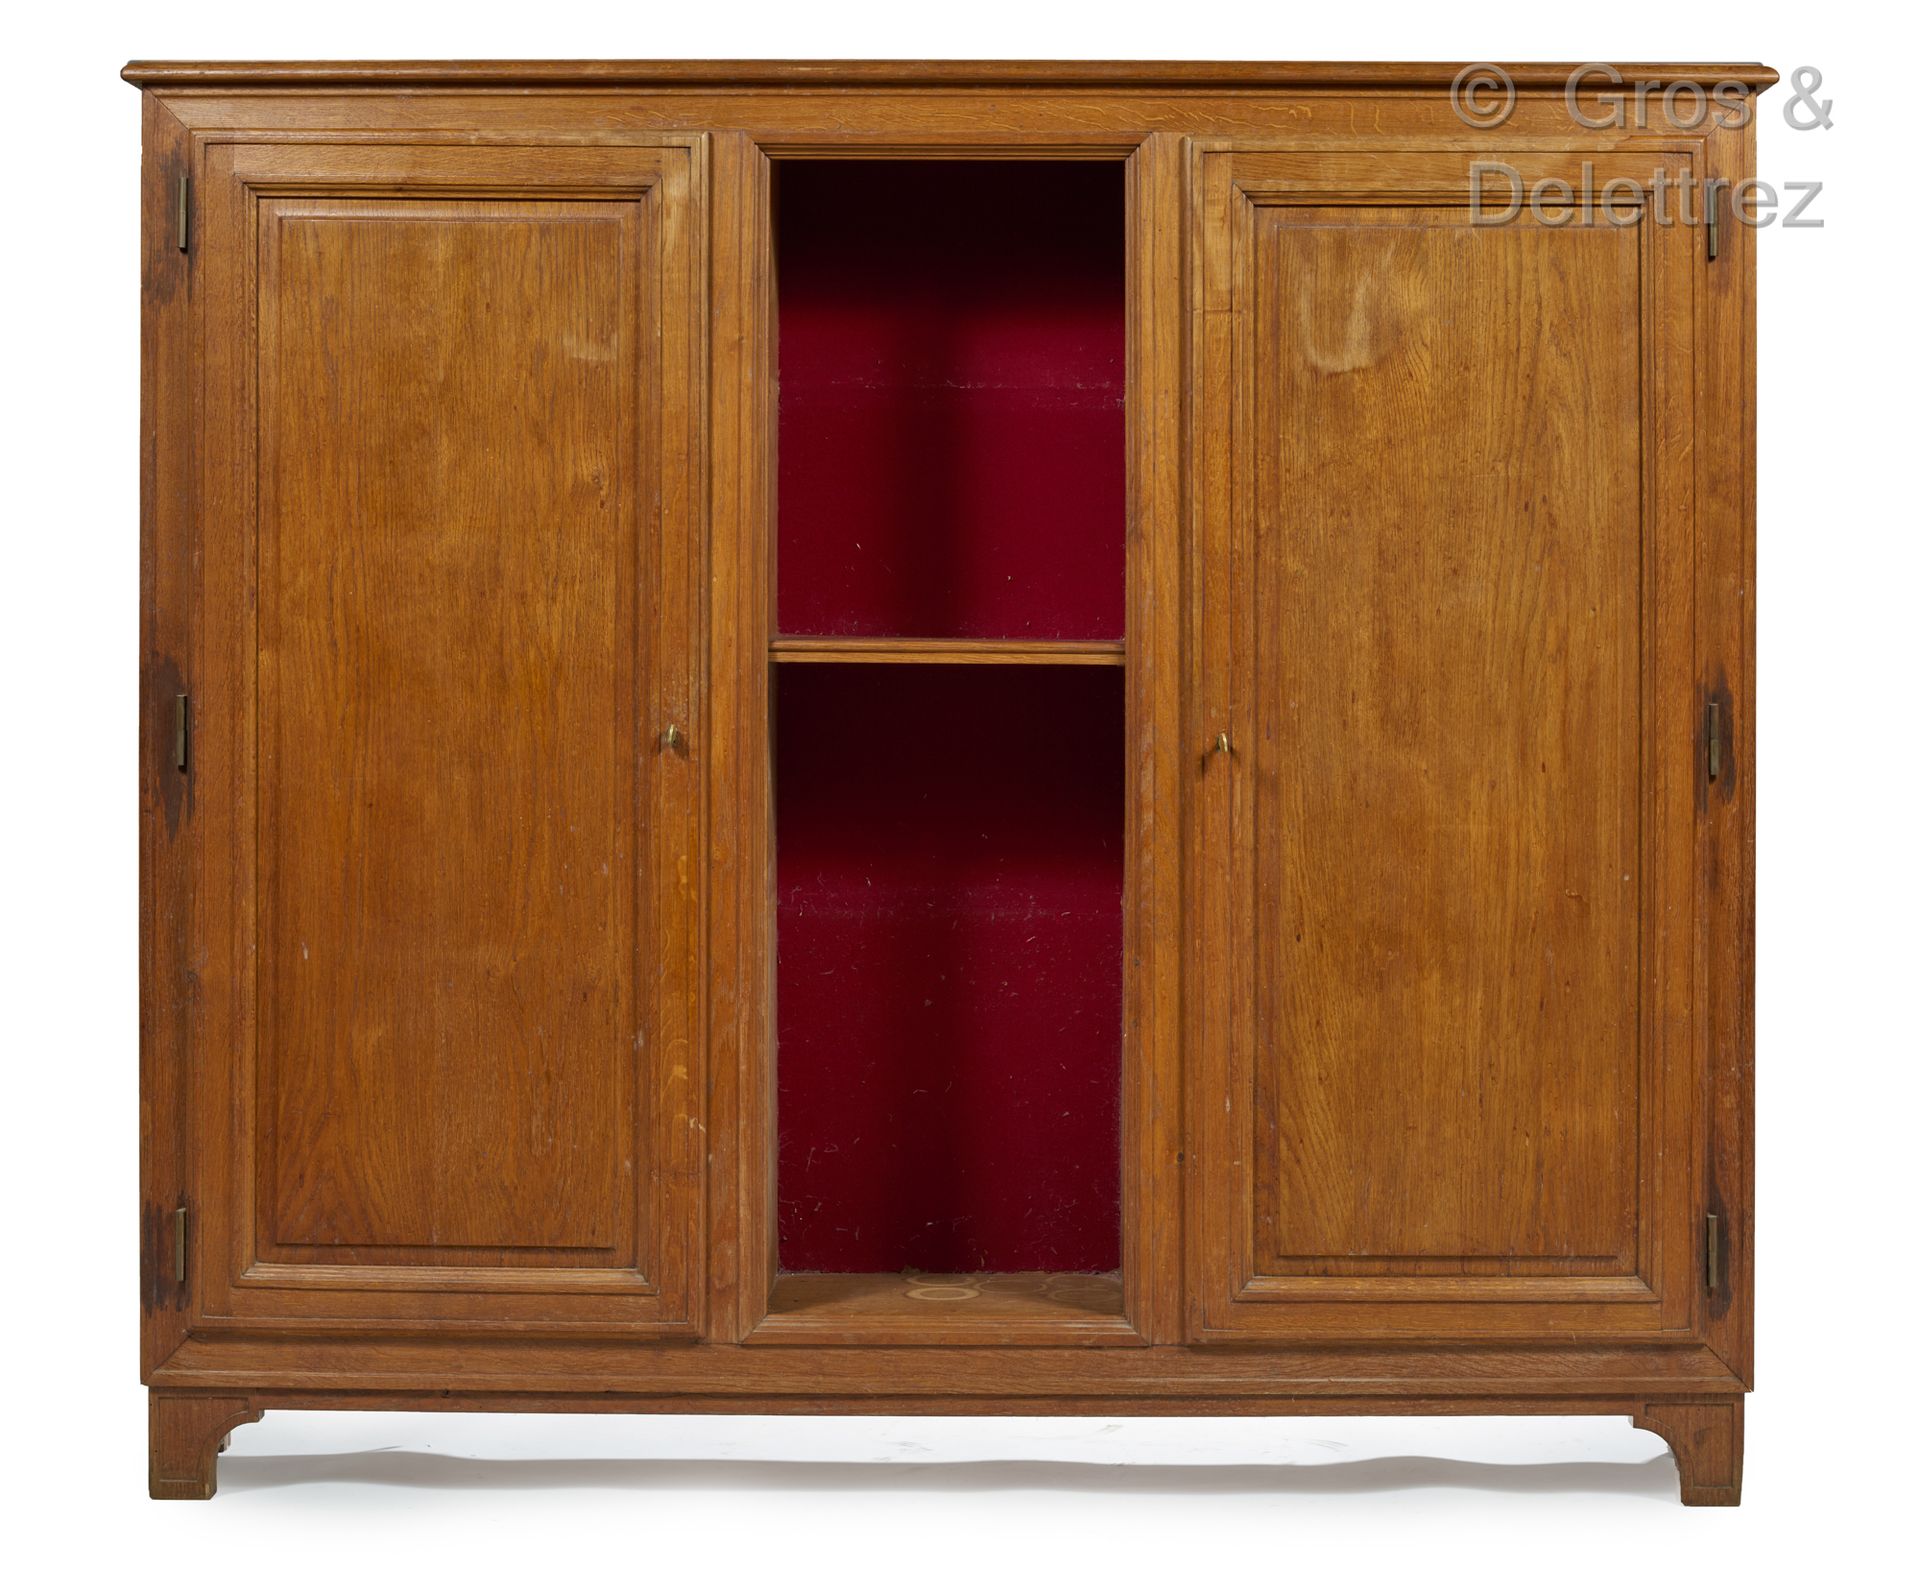 Null PAUL DUPRE LAFON (1900-1971)

Moulded oak storage unit opening with two doo&hellip;